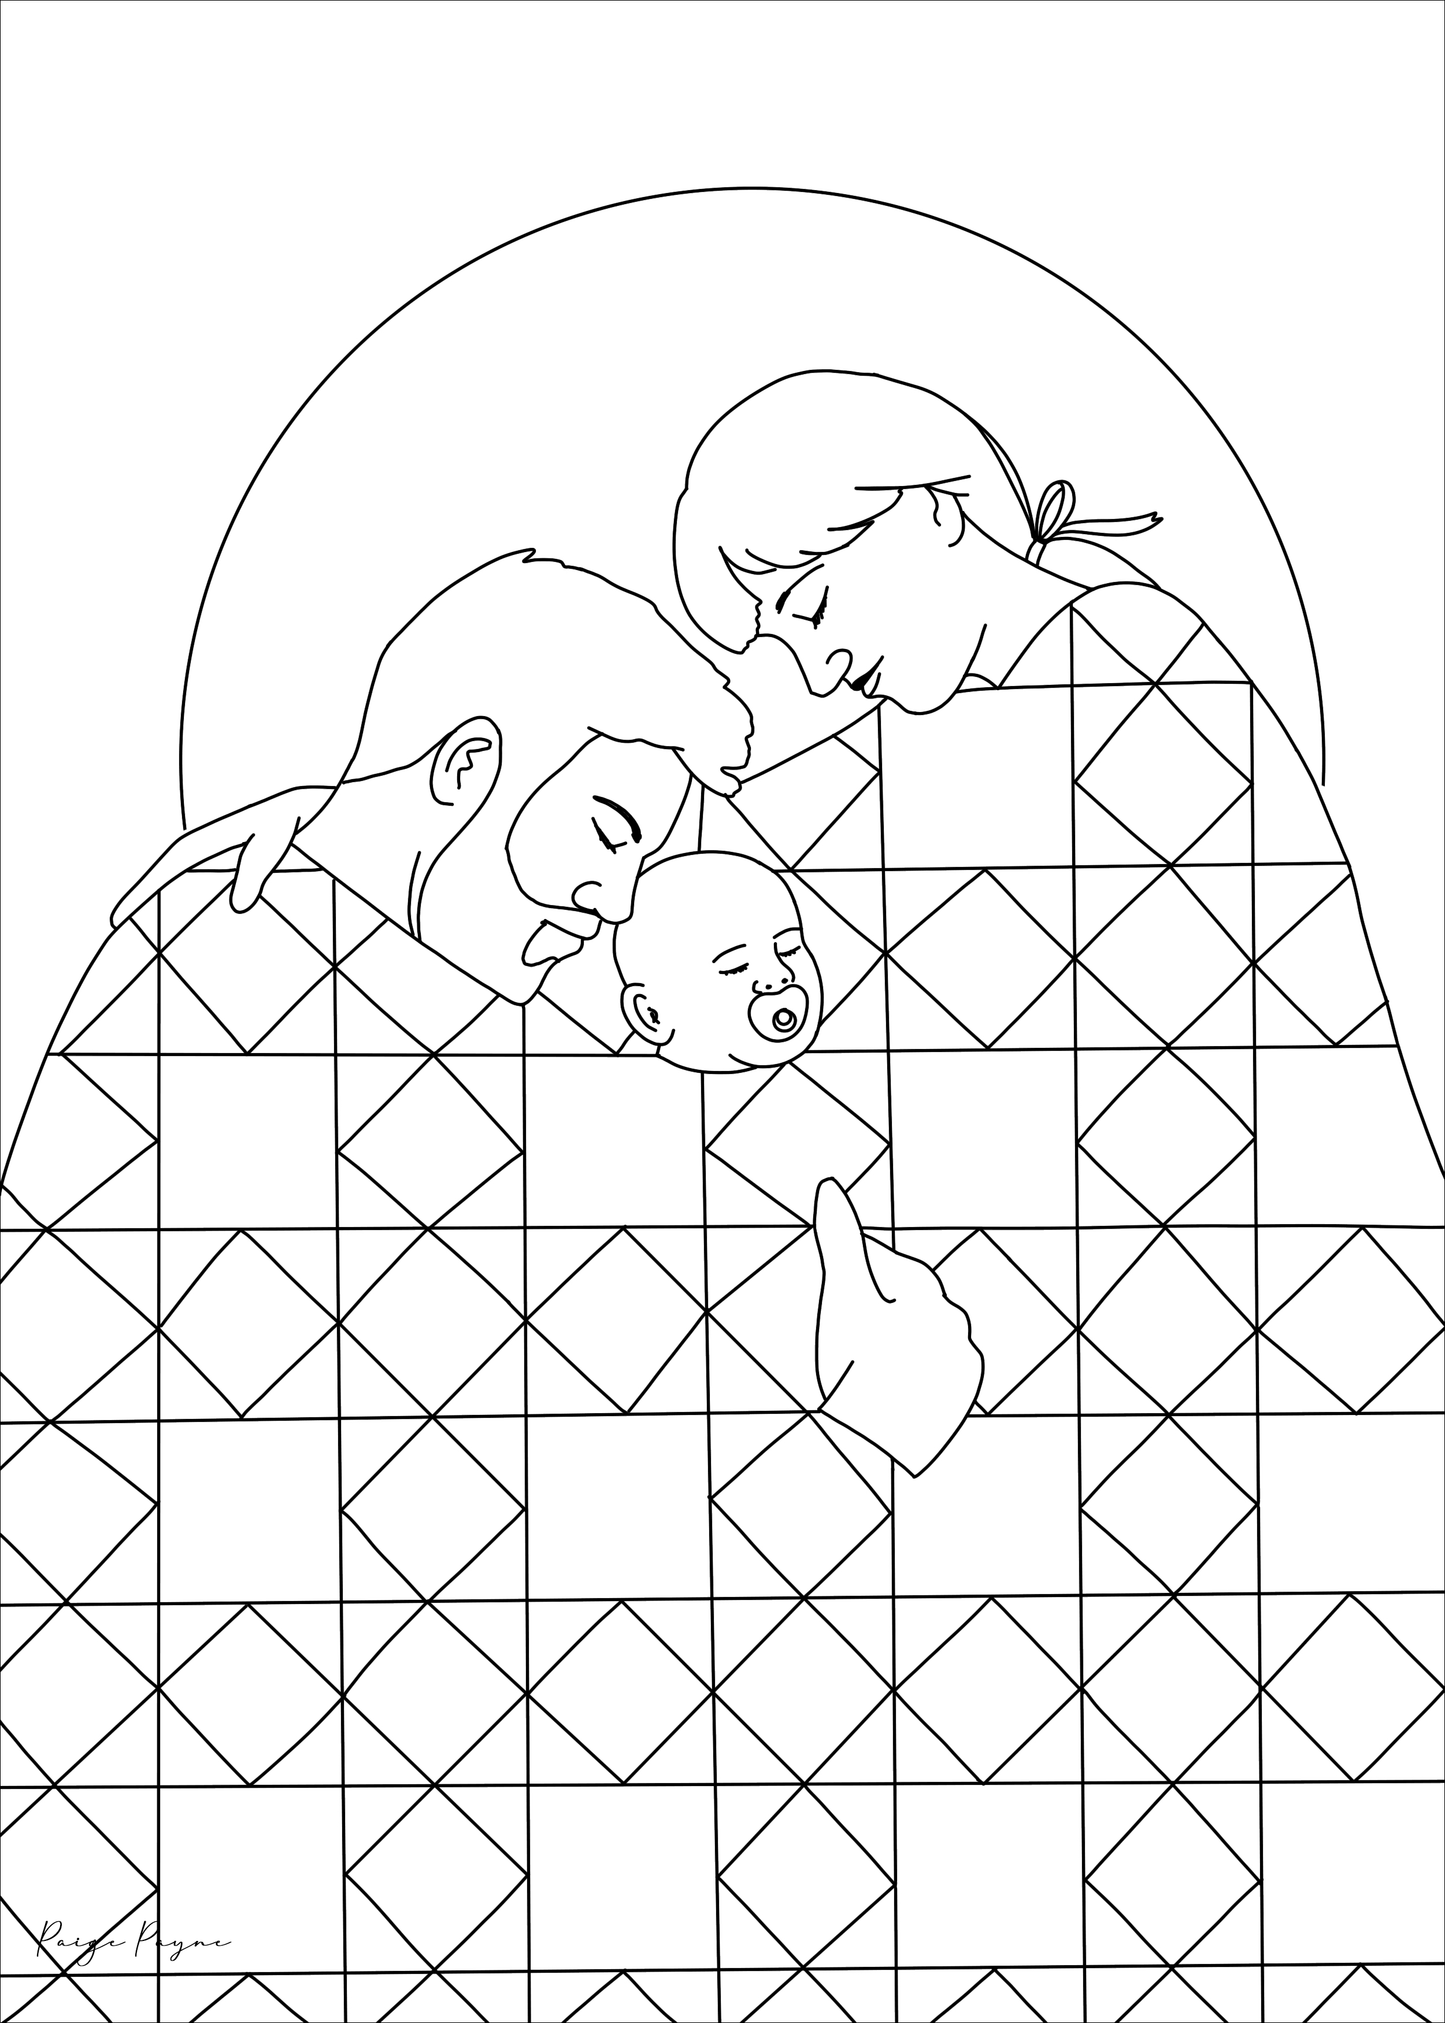 FREE Father's Day Card (set of 4 coloring pages) 5x7 Digital Download